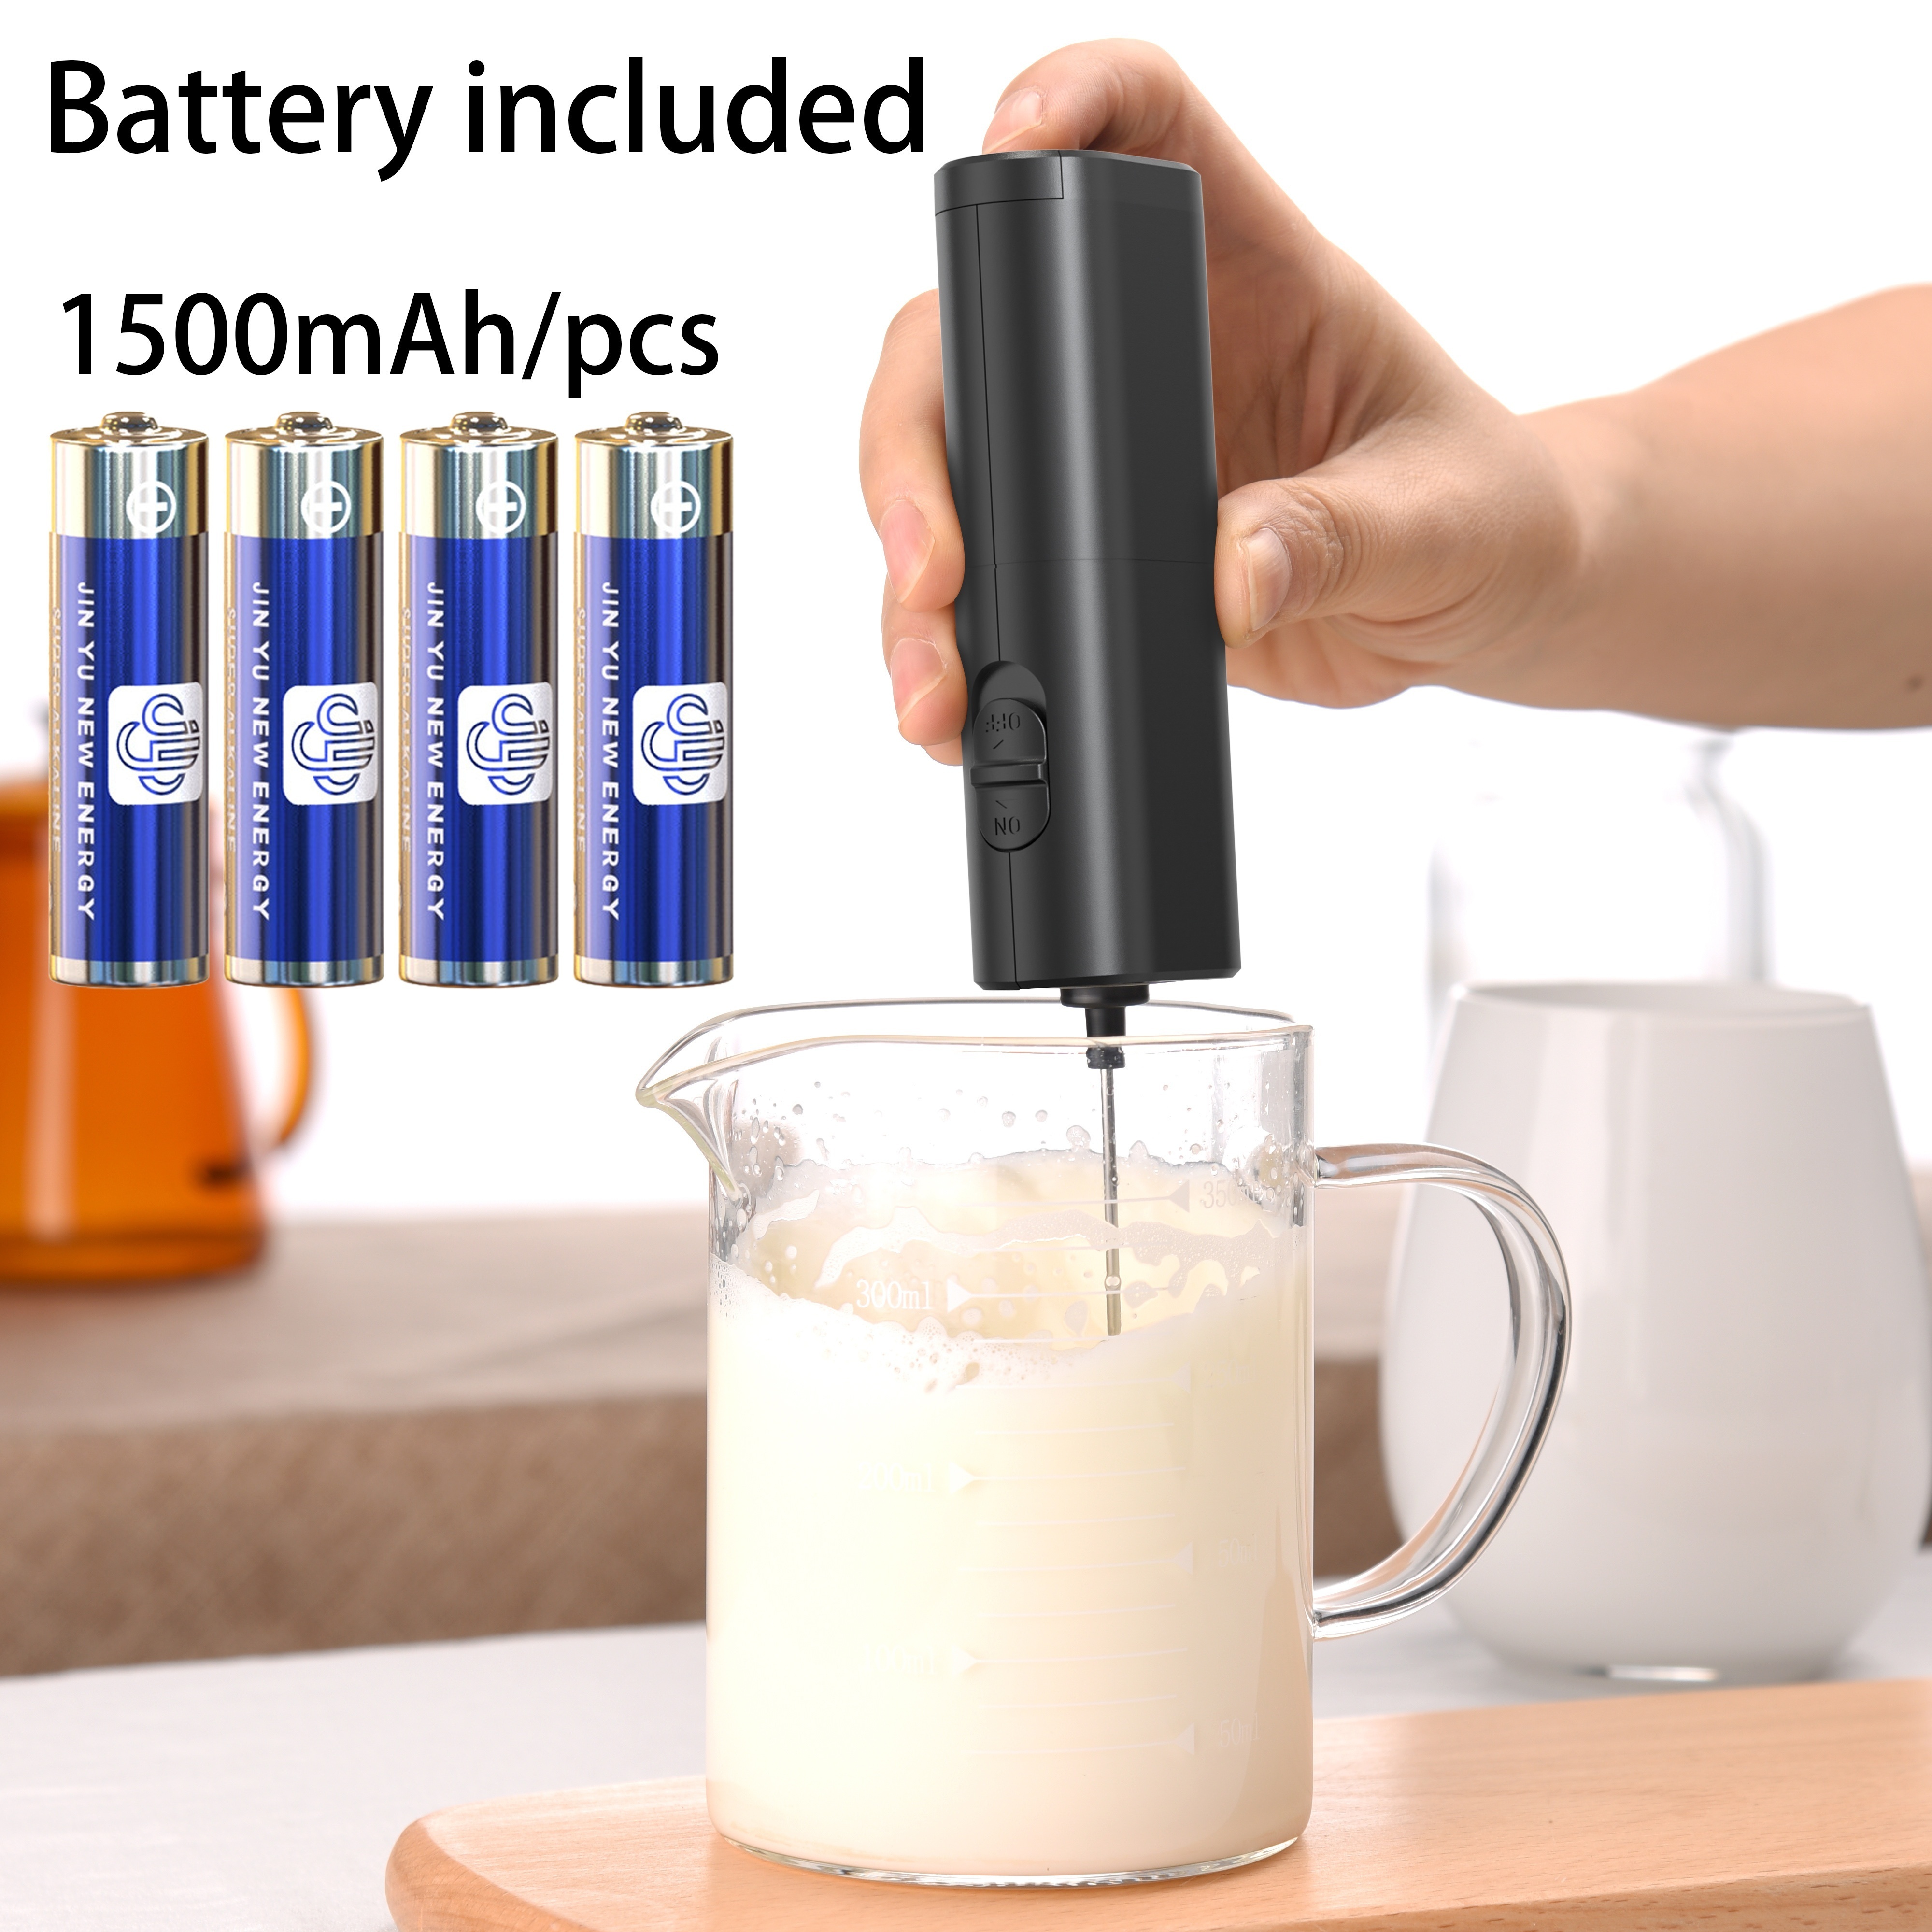 Mini Portable Handheld Milk Frother, Whisk With Battery Electric Mixer For  Coffee And Other Beverages Battery Operated Stirrer And Mixer For  Frappuccino, Lattes, Milk, Matcha, Tarts, Egg Small Appliance Back To School